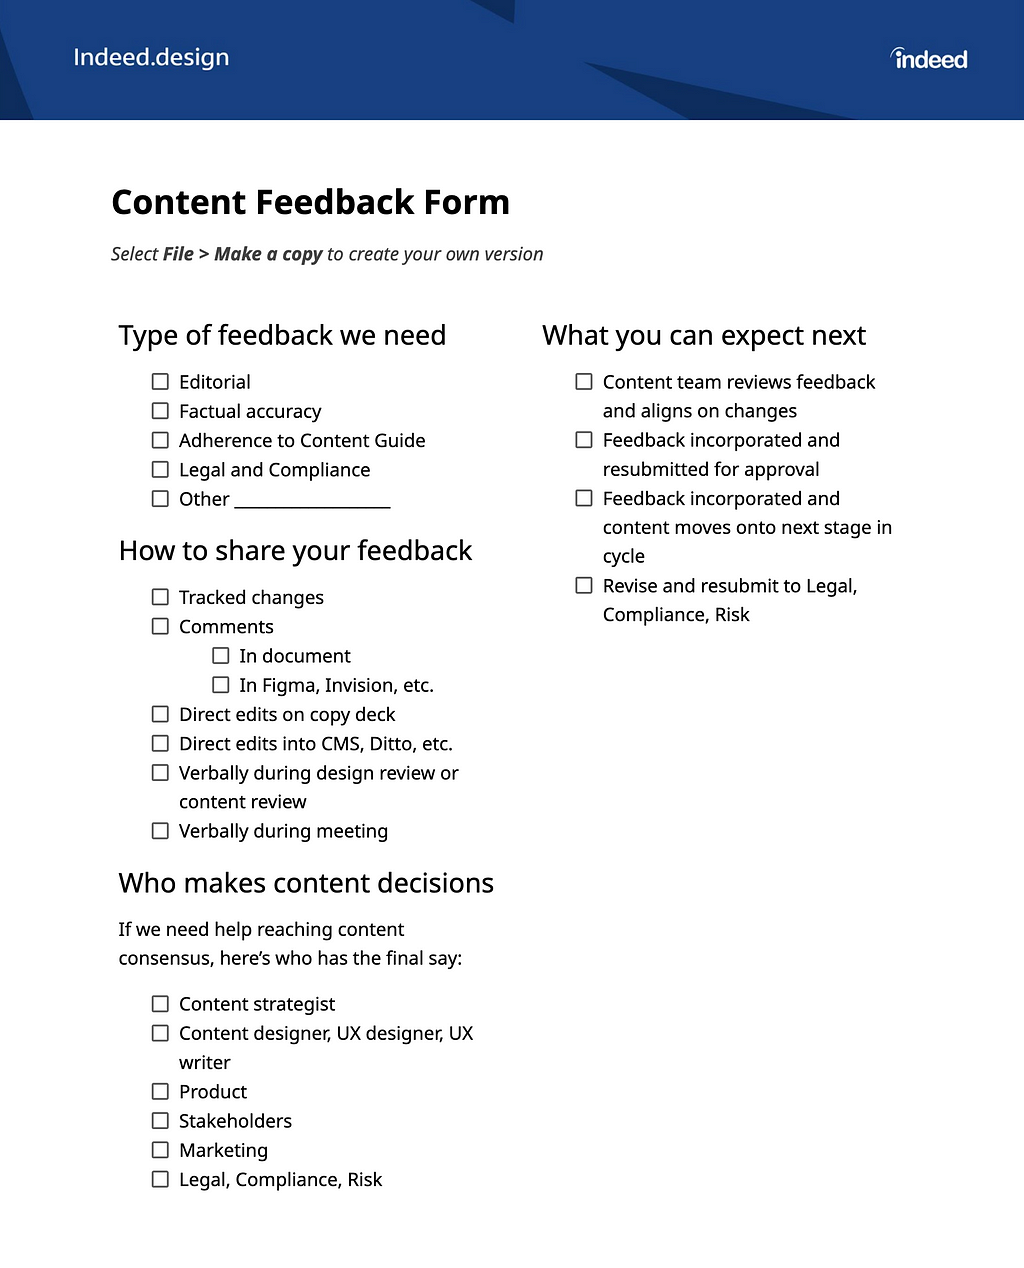 An example content feedback form groups checklist items by topic to focus reviewers’ attention.